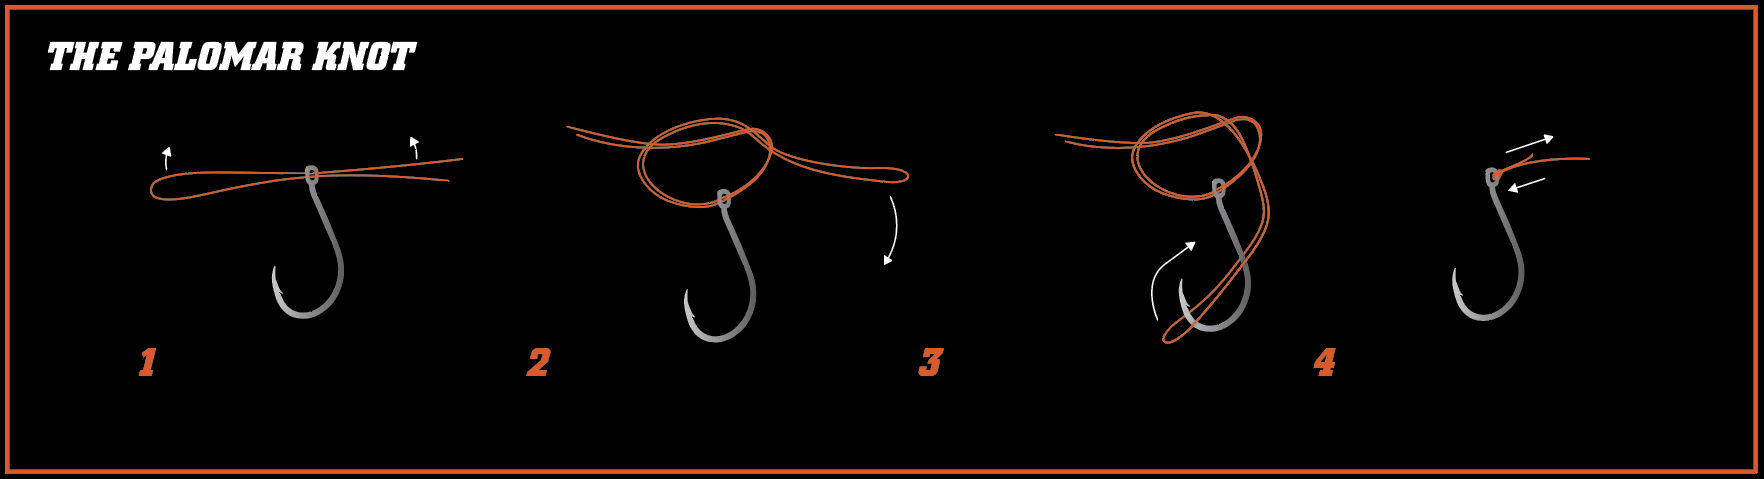 Step-by-step illustration showing how to tie a Palomar knot for fishing, featuring clear instructions and labeled parts for easy learning